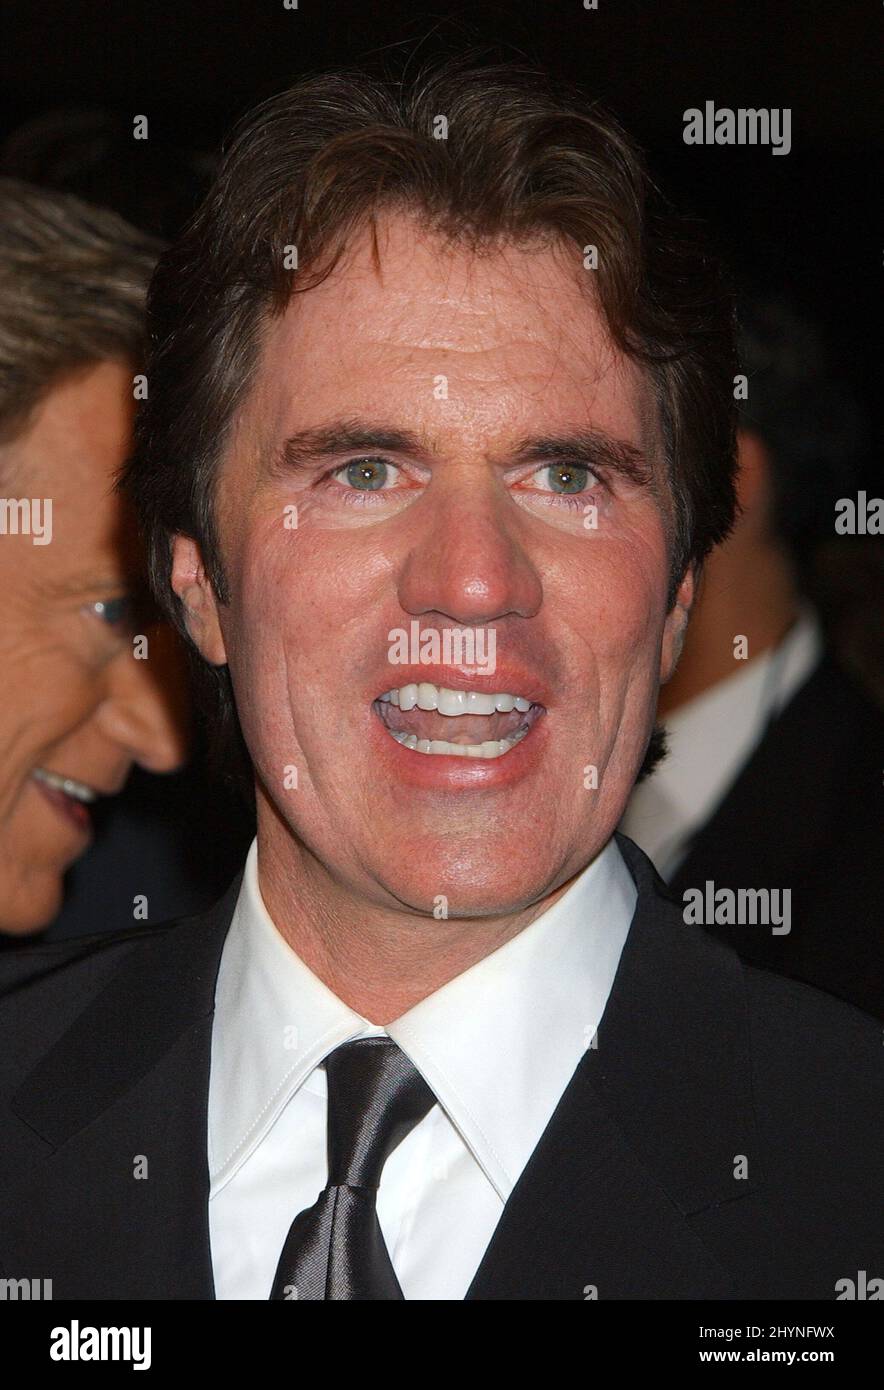 ROB MARSHALL ATTENDS THE 'CHICAGO' PREMIERE AT THE ACADEMY THEATRE, BEVERLY HILLS. PICTURE: UK PRESS Stock Photo